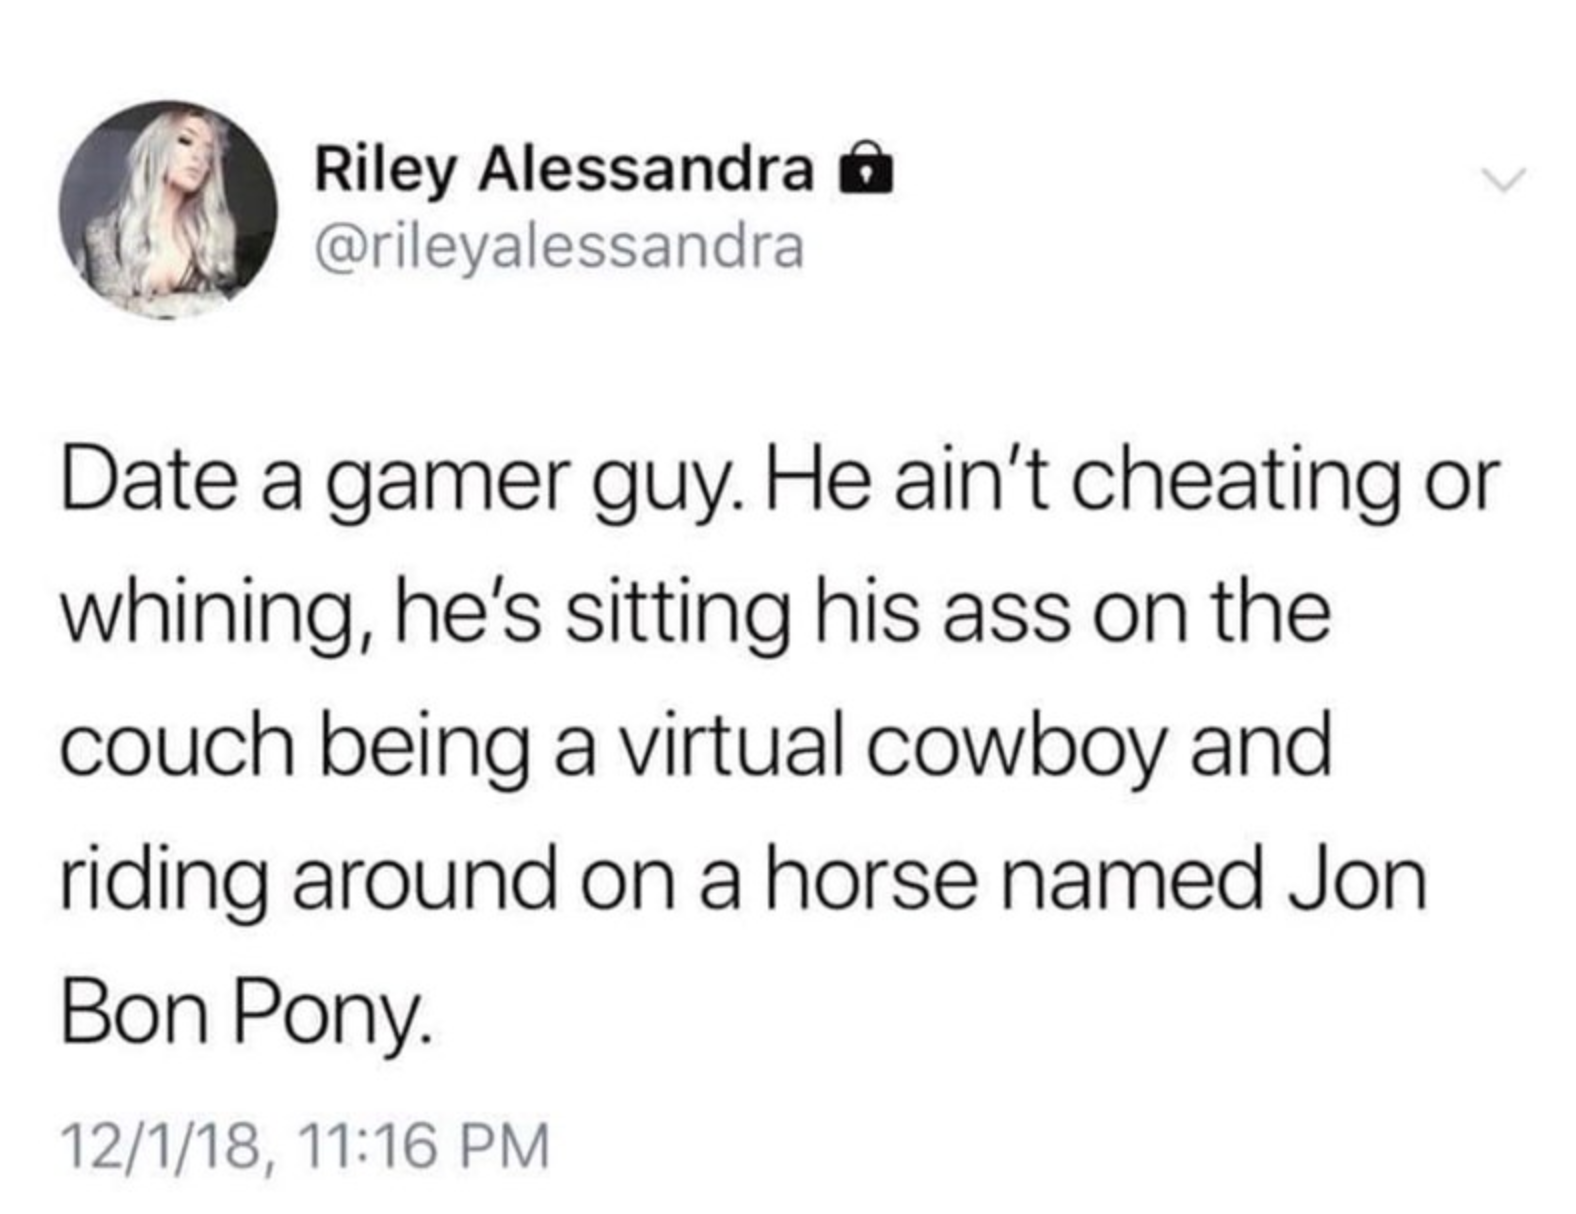 funny gaming memes - hgtv meme parents - Riley Alessandra G Date a gamer guy. He ain't cheating or whining, he's sitting his ass on the couch being a virtual cowboy and riding around on a horse named Jon Bon Pony. 12118,